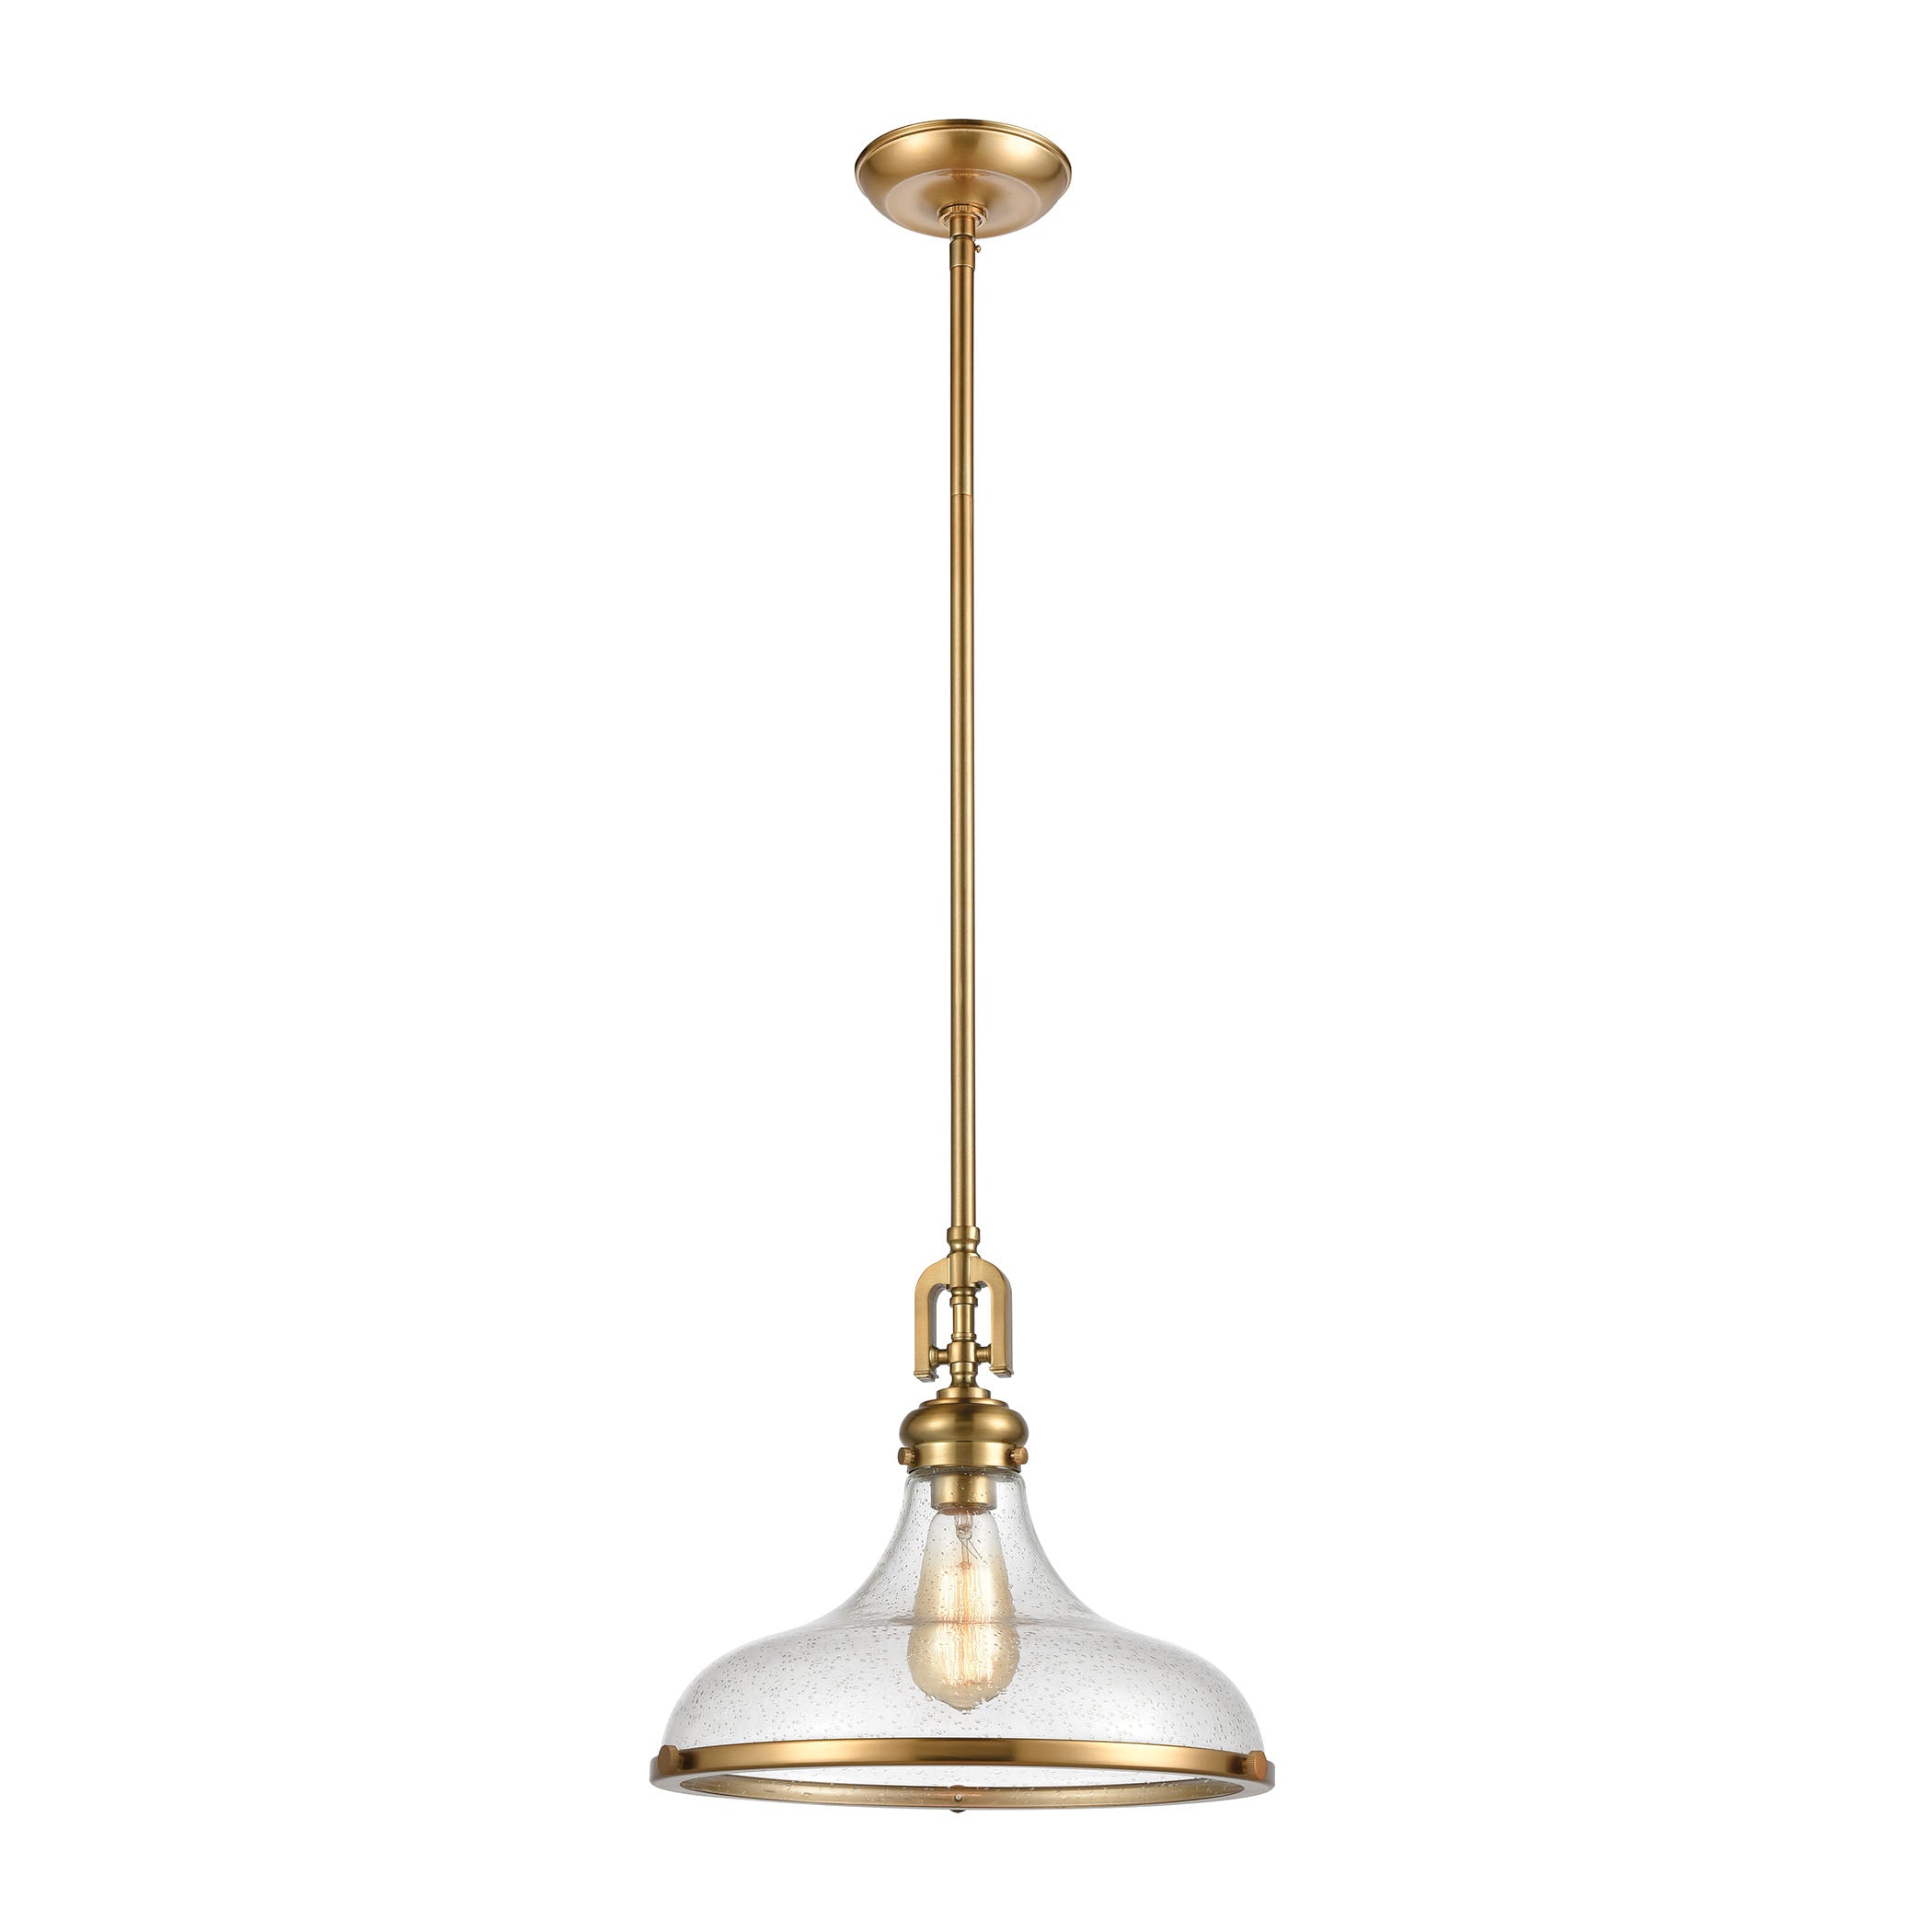 ELK Lighting 57371/1 Rutherford 1-Light Pendant in Satin Brass with Seedy Glass